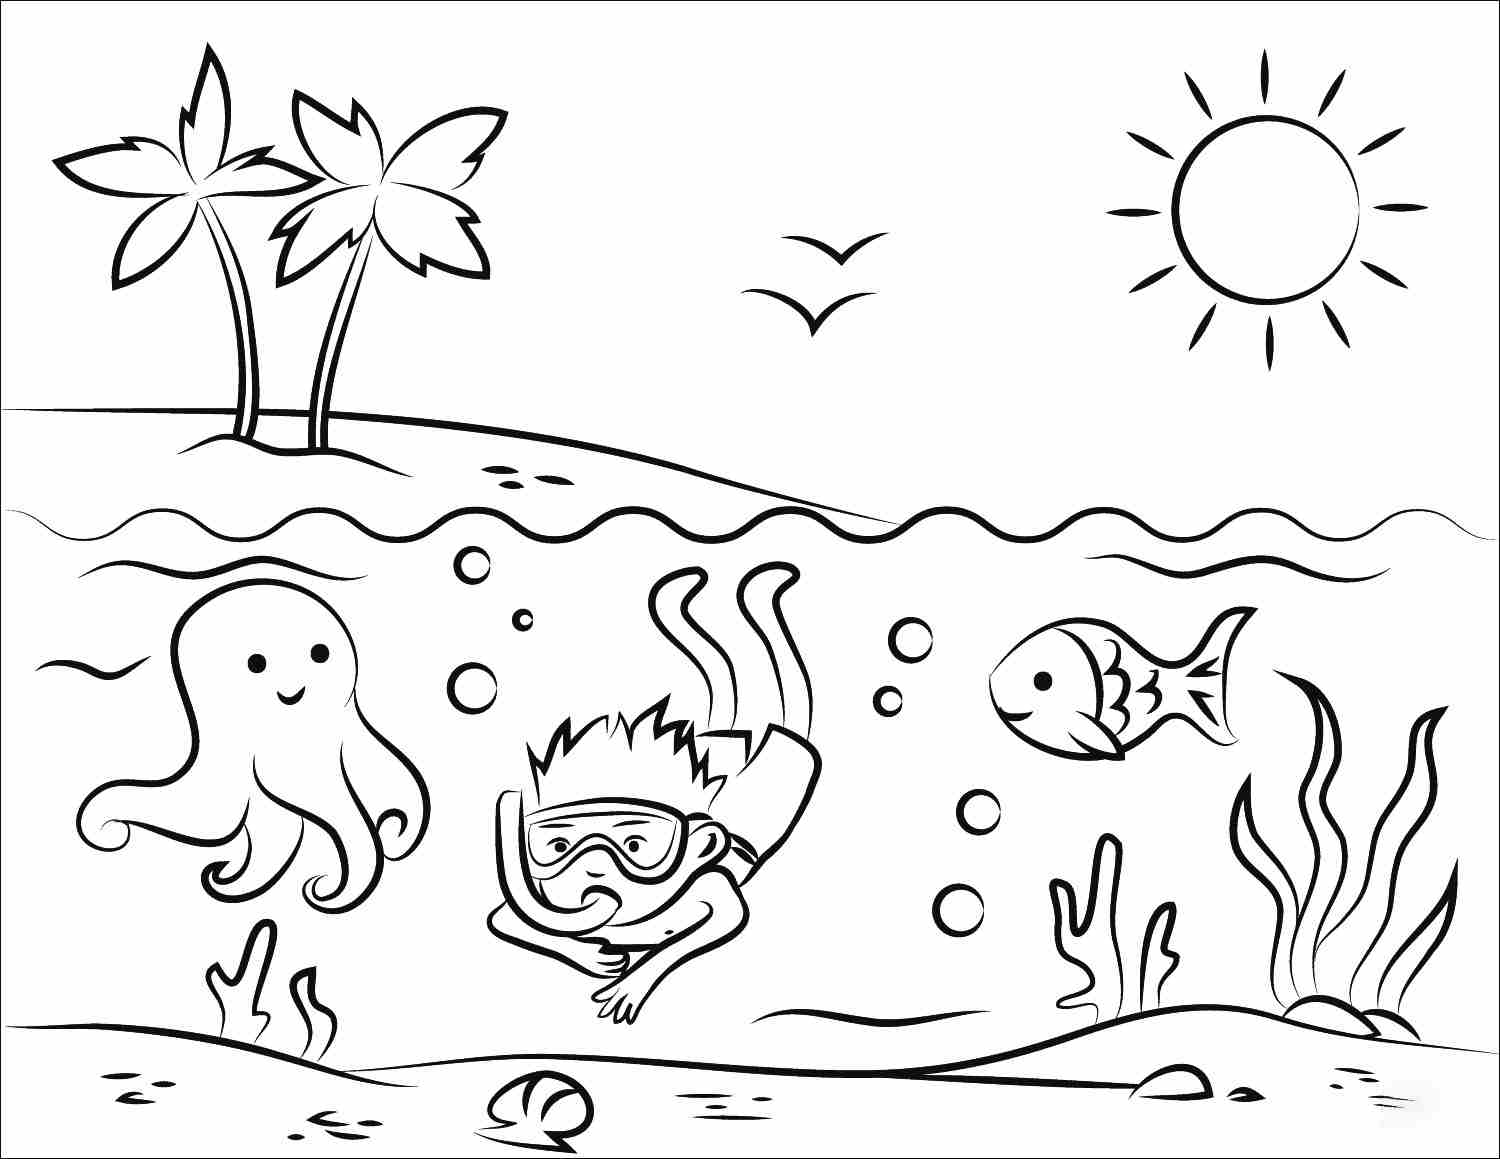 The boy diving under the sea in the sunset Coloring Page